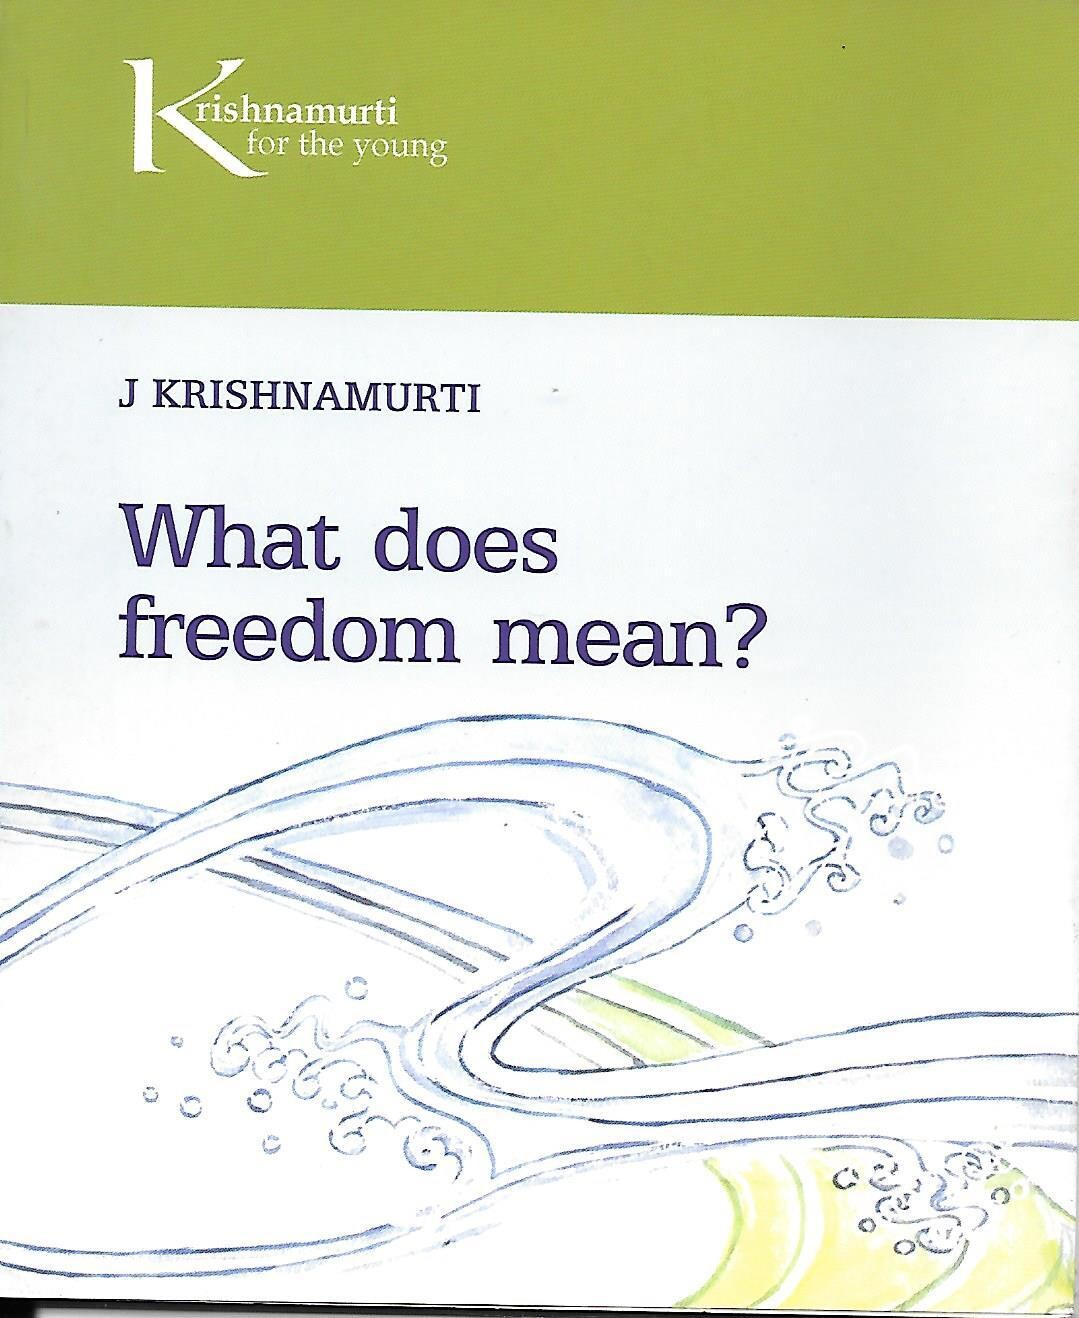 WHAT DOES FREEDOM MEAN